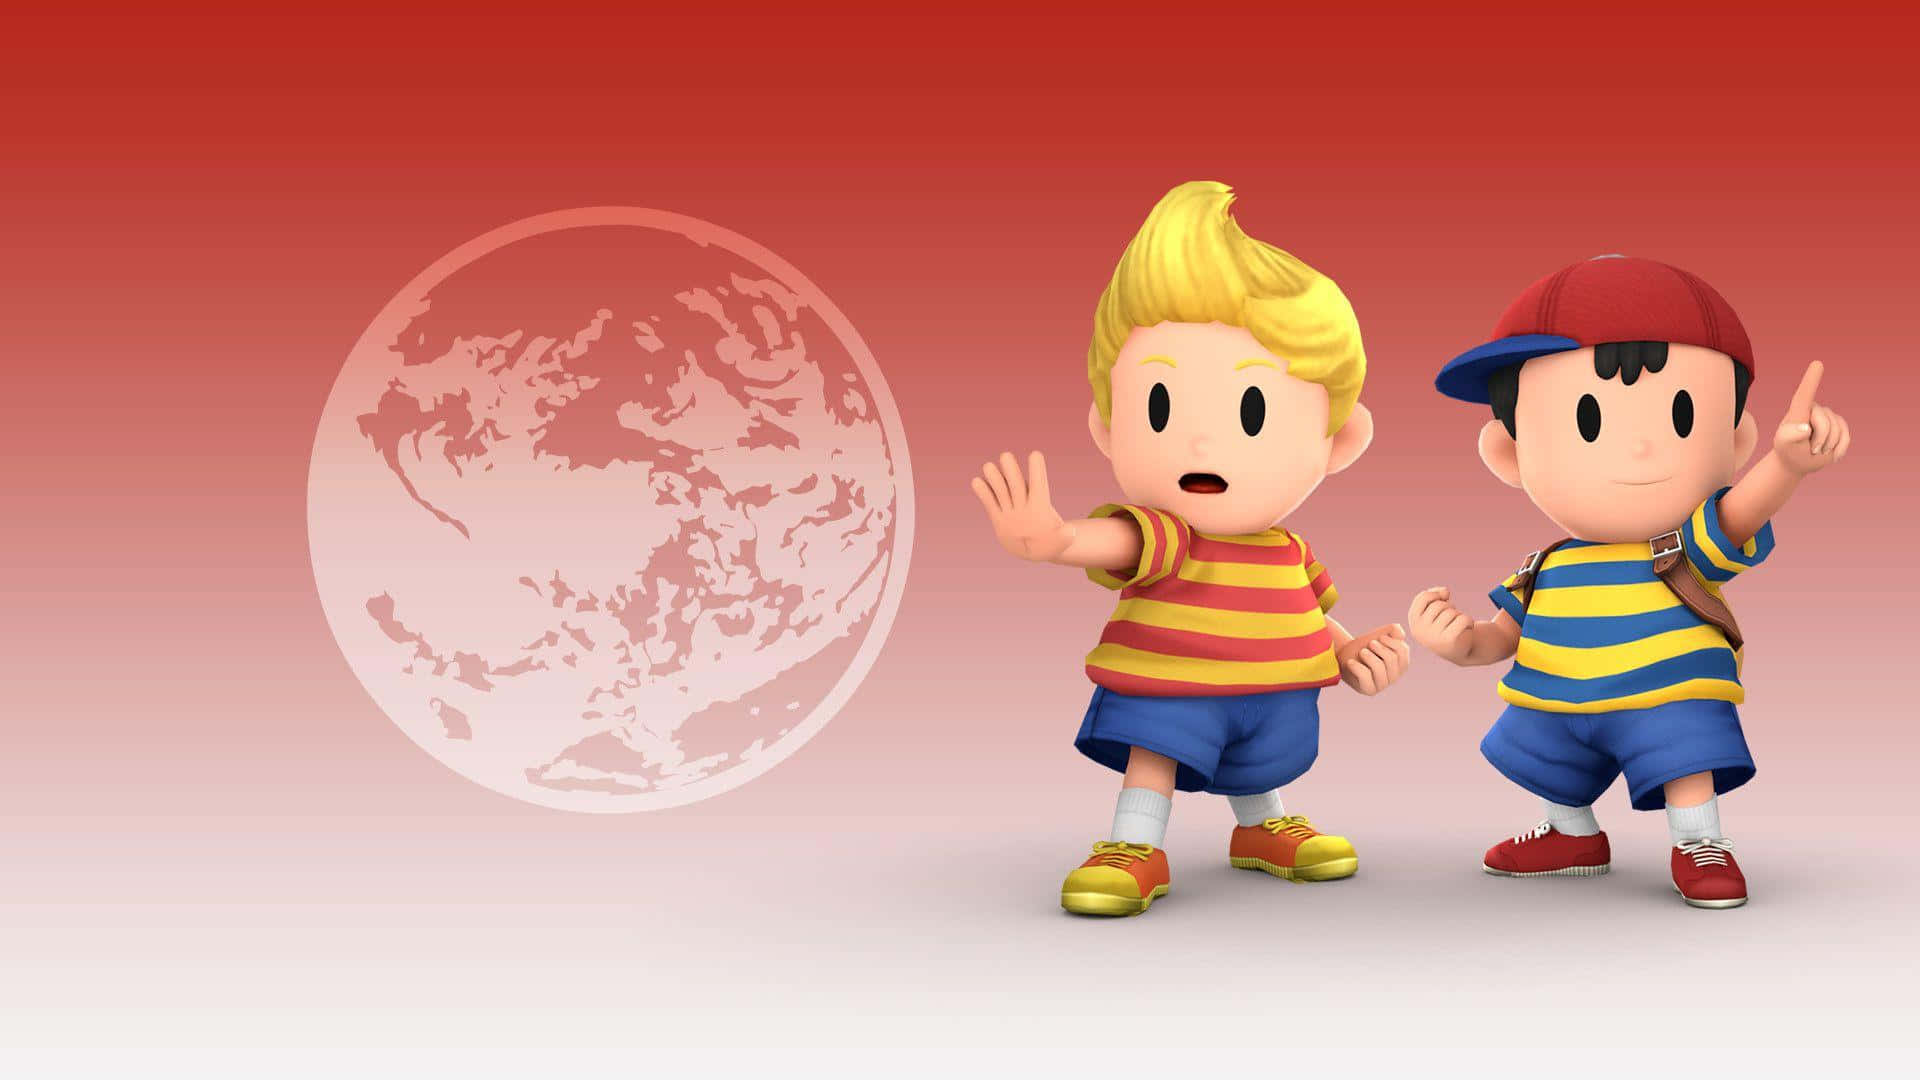 Explore the vibrant world of Earthbound.